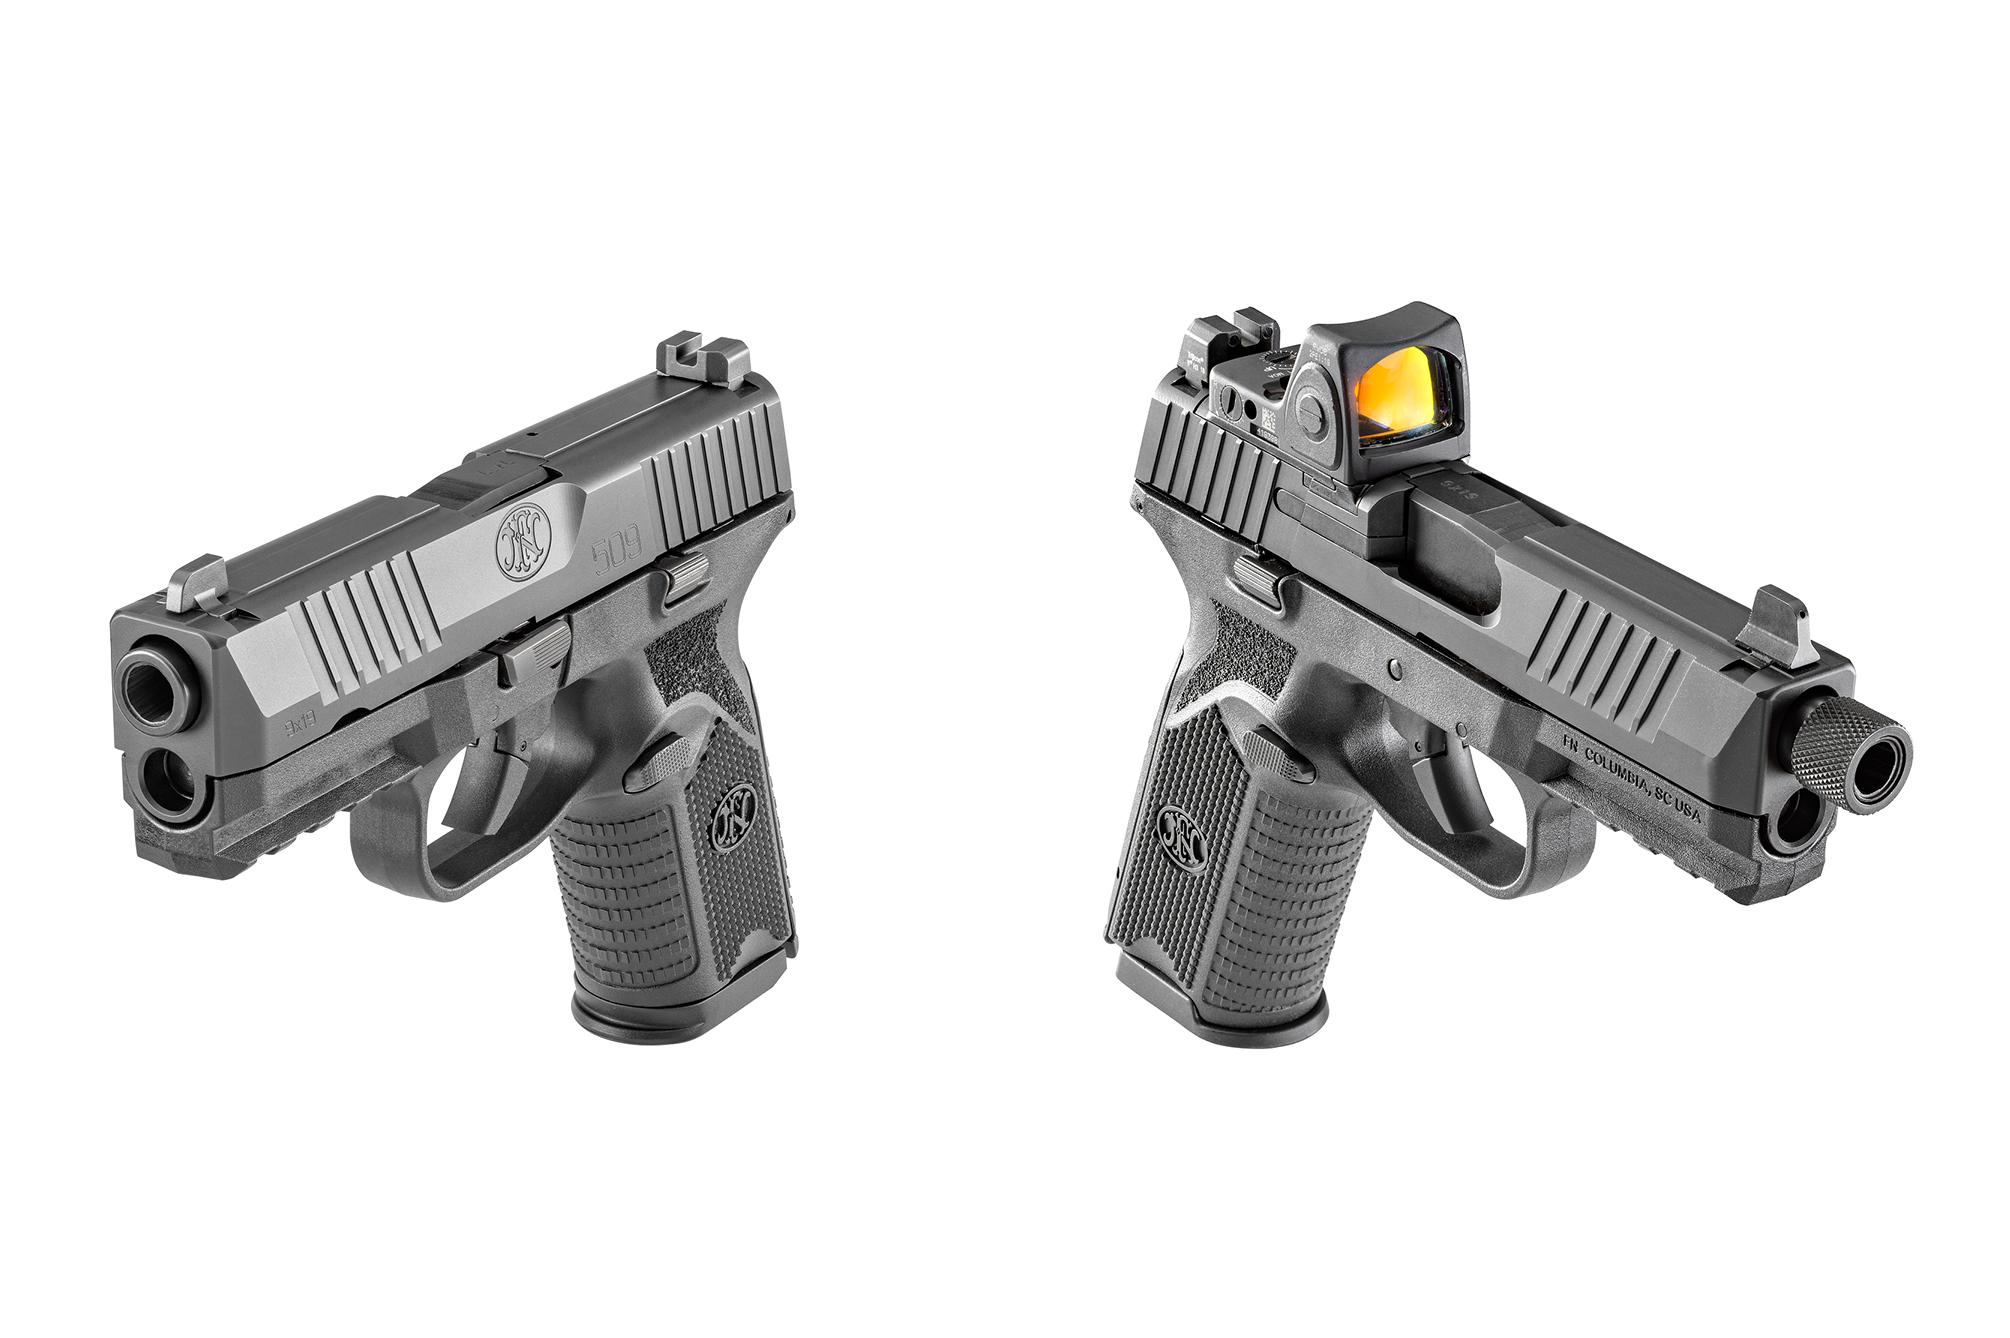 FN Announces New 509 Midsize To Lineup » Concealed Carry Inc